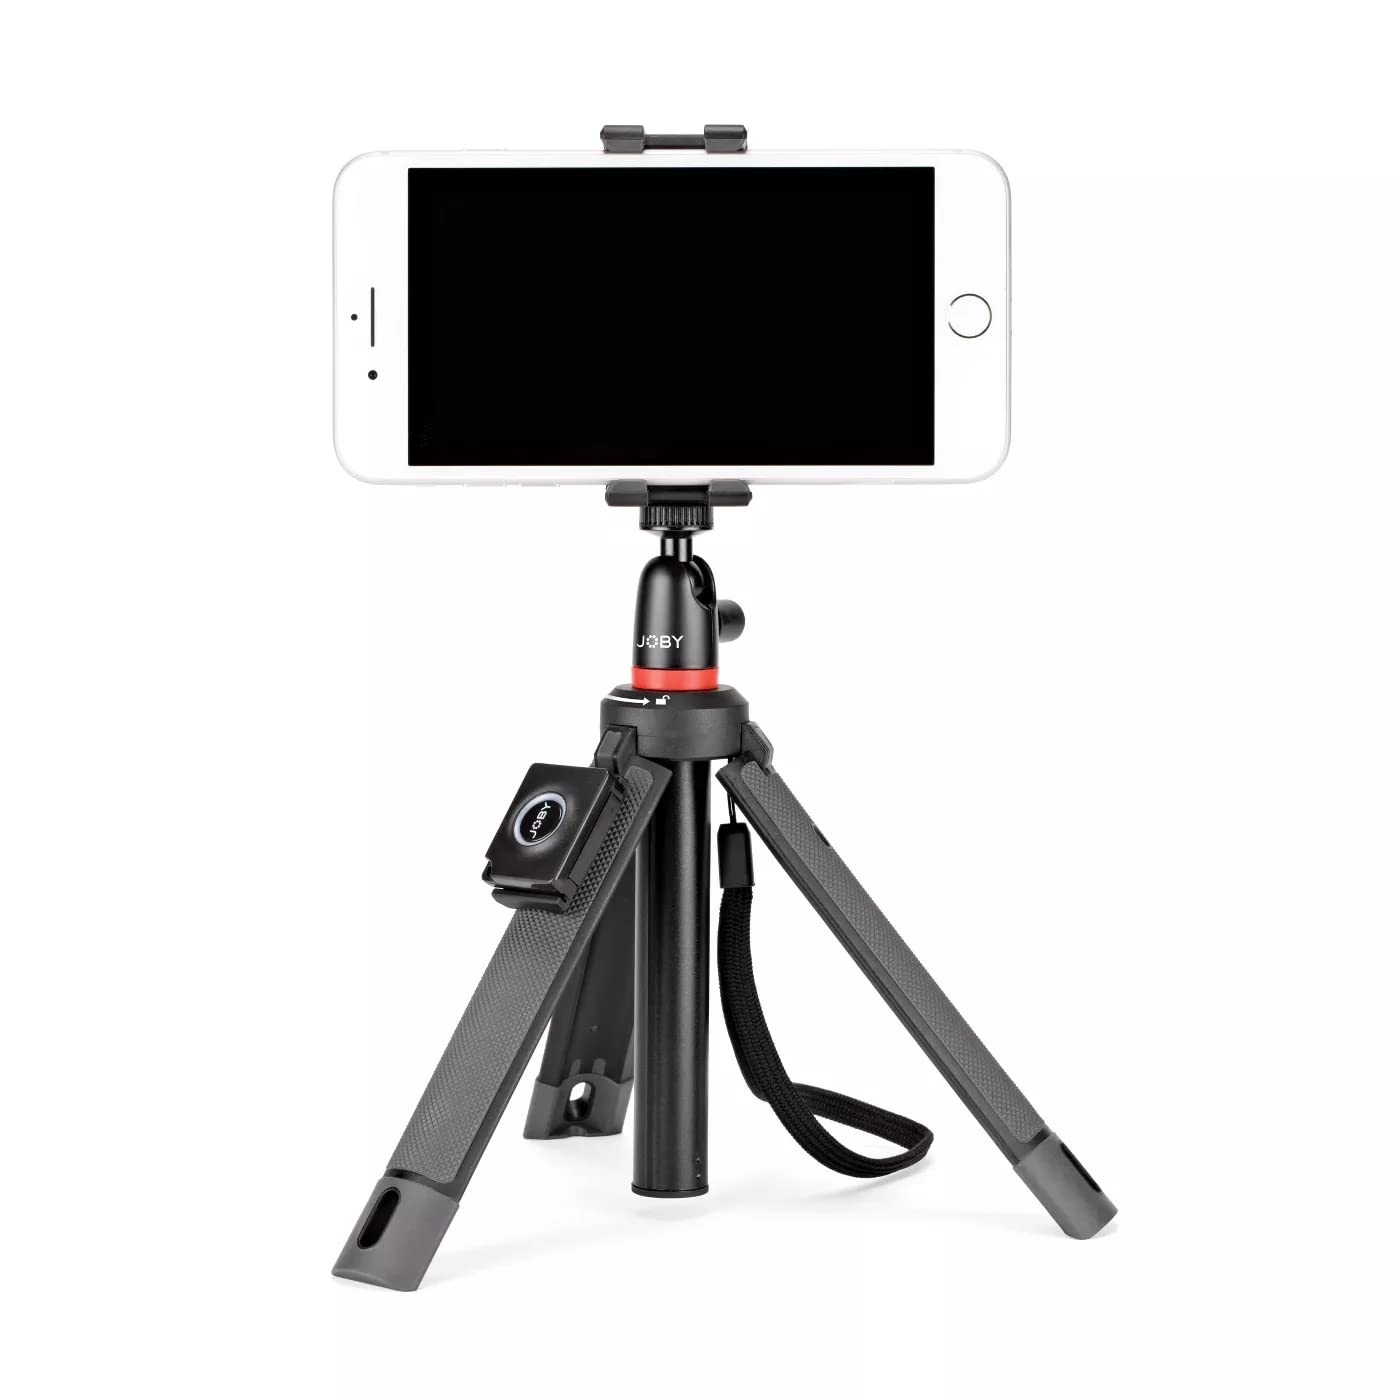 Joby Telepod Mobile Tripod for Smartphone and Camera - Bluetooth